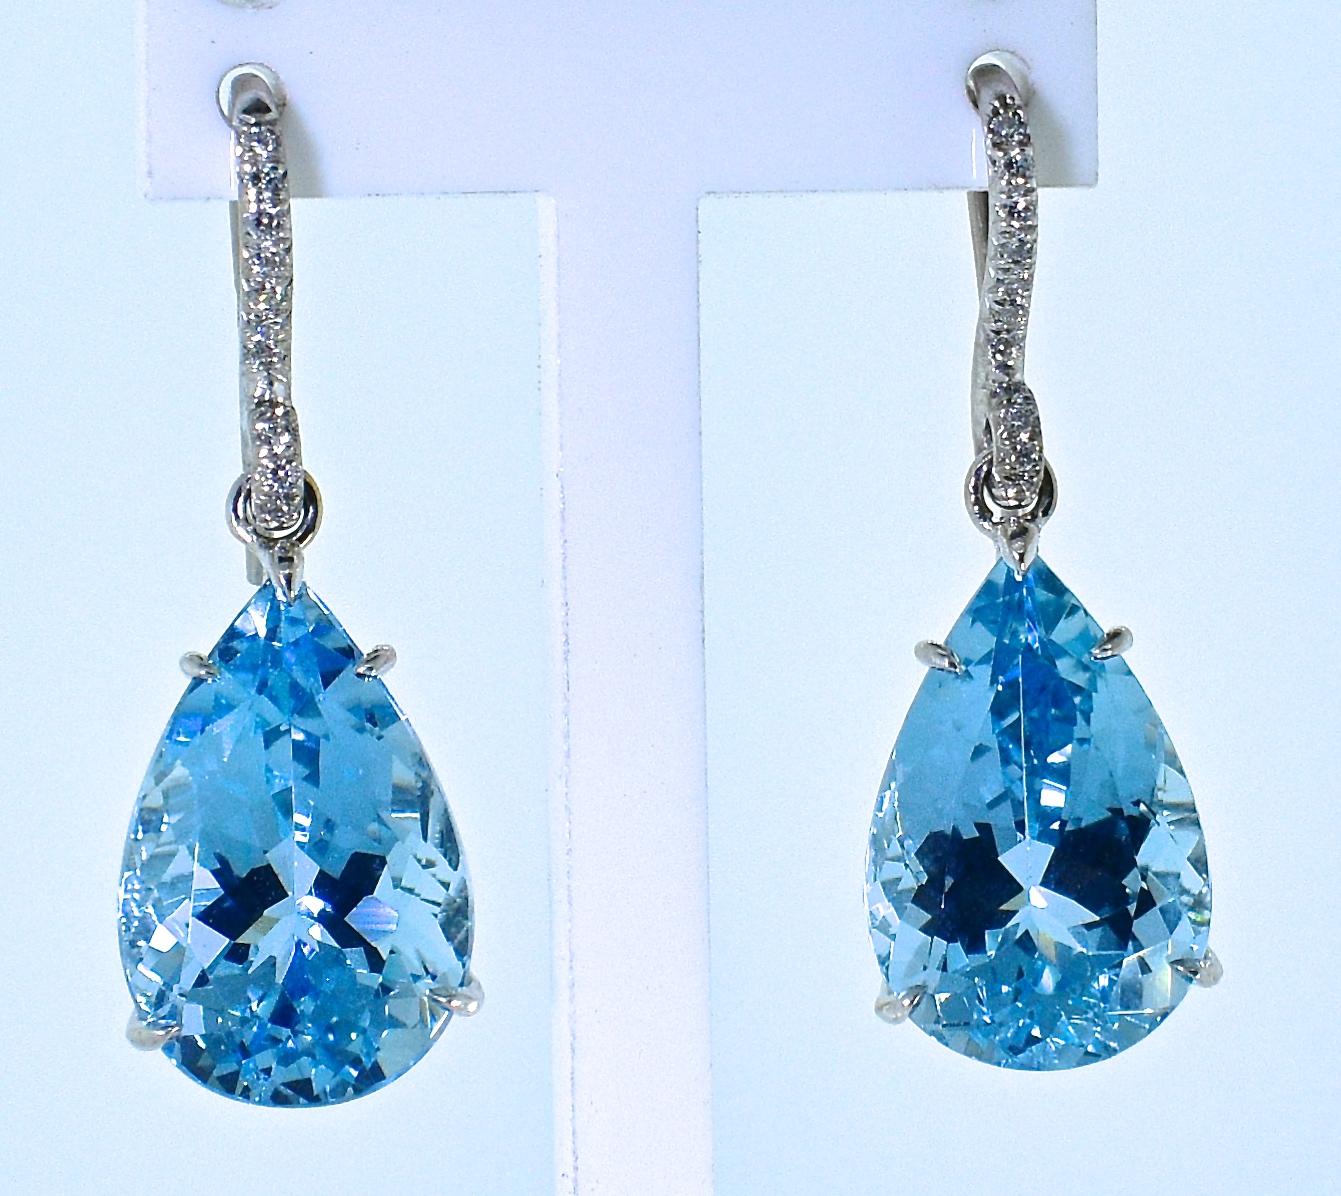 Aquamarine and fine diamond pendant style earrings hand made in 18K white gold with approximately 16 cts. of fine pear cut natural aquamarines.  These well matched and well cut stones with 22 small brilliant cut white diamonds.  These earrings are